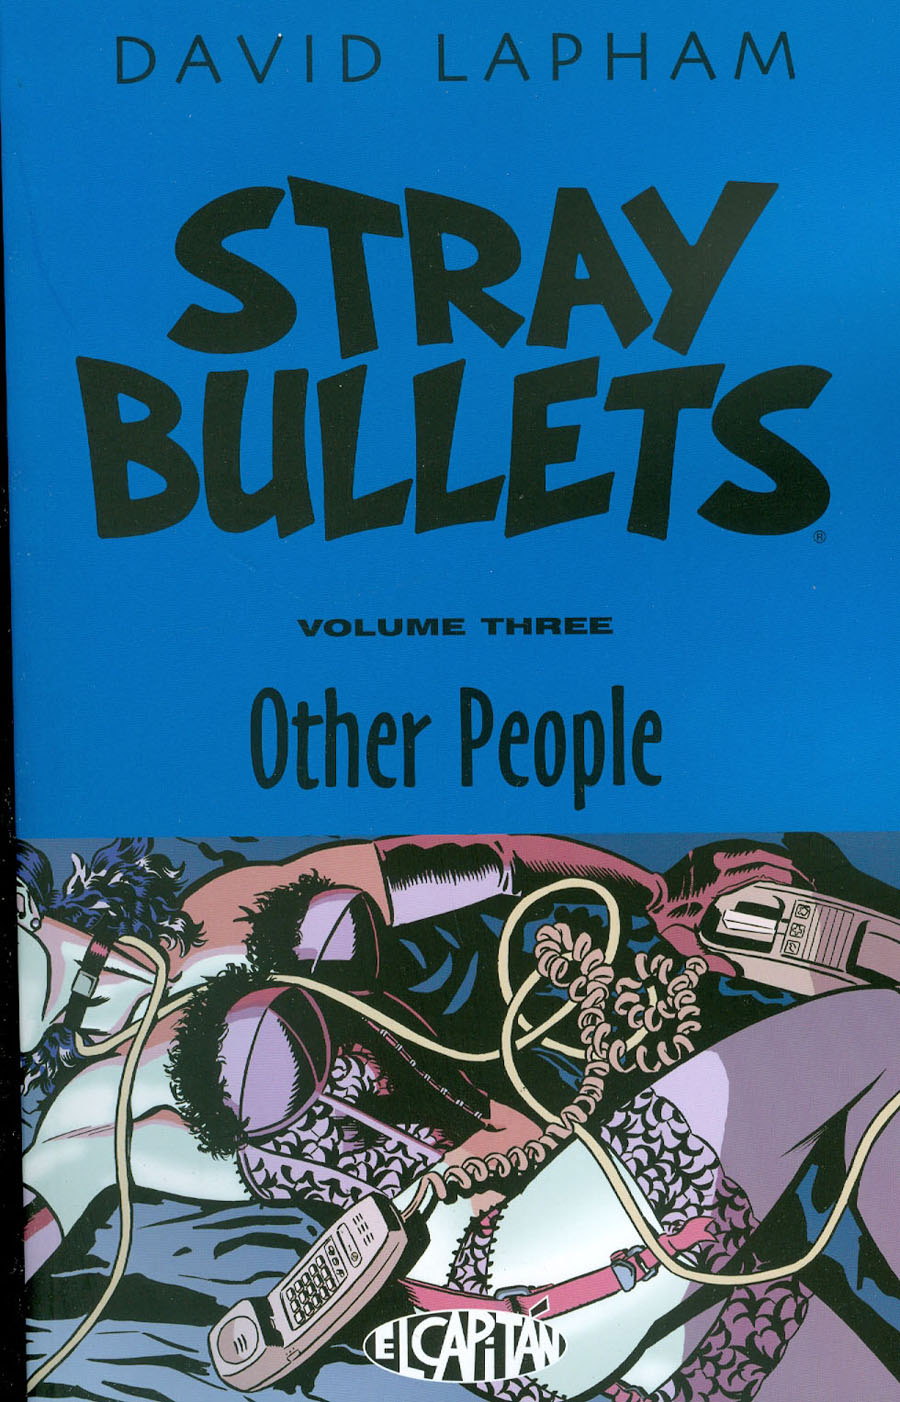 Stray Bullets Vol 3 Other People TP Image Edition